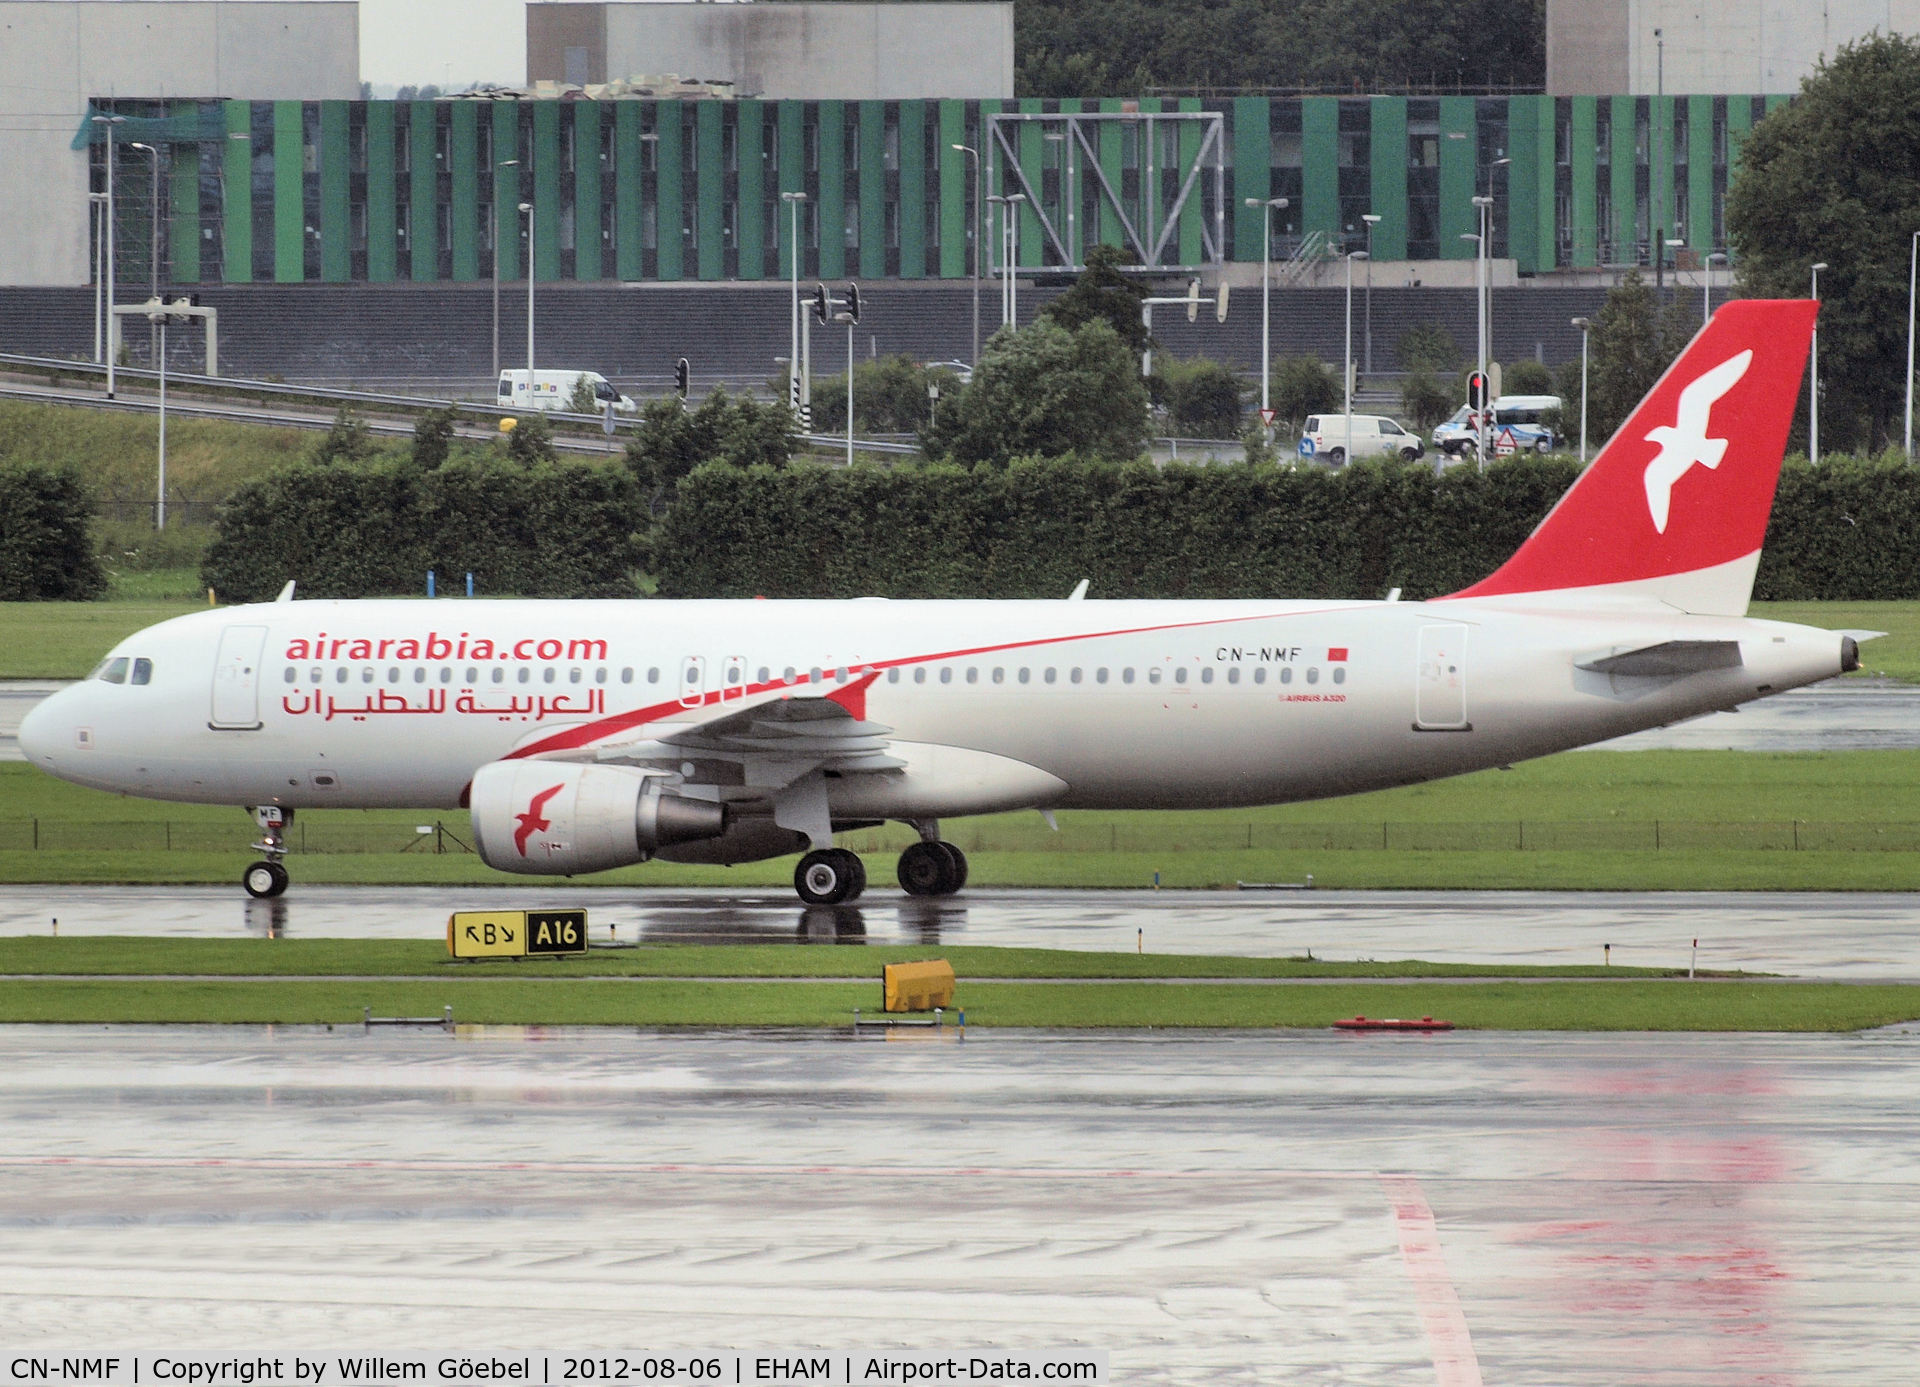 CN-NMF, 2010 Airbus A320-214 C/N 4539, Taxi to the gate of Schiphol Airport